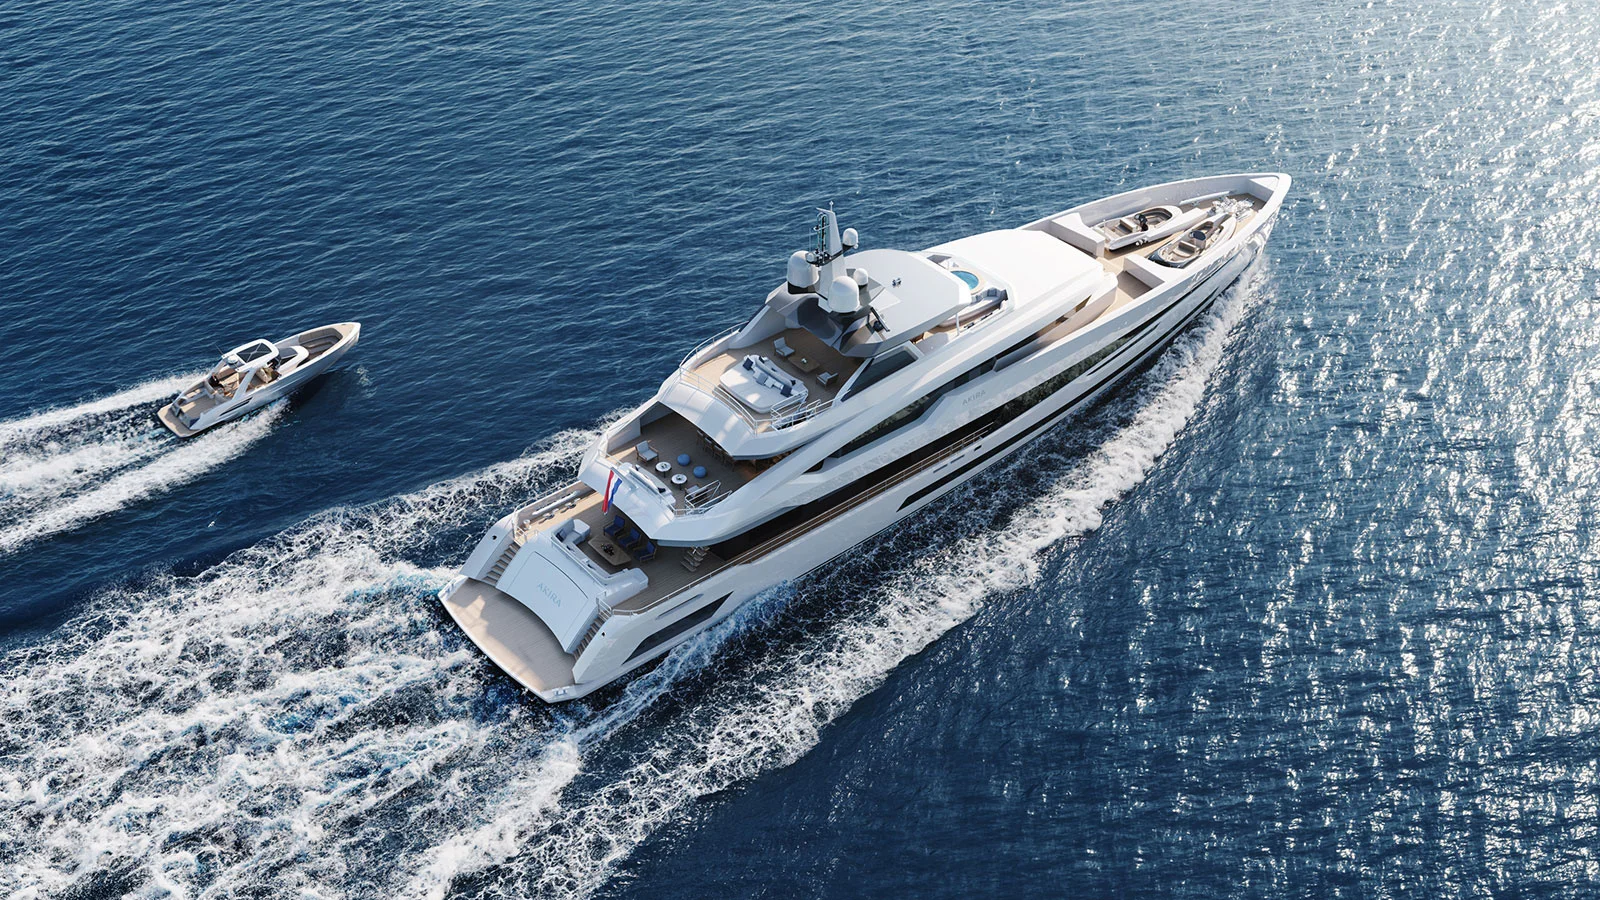 The superyacht features Van Oossanen’s ultra-efficient Fast Displacement Hull Form (FDHF)